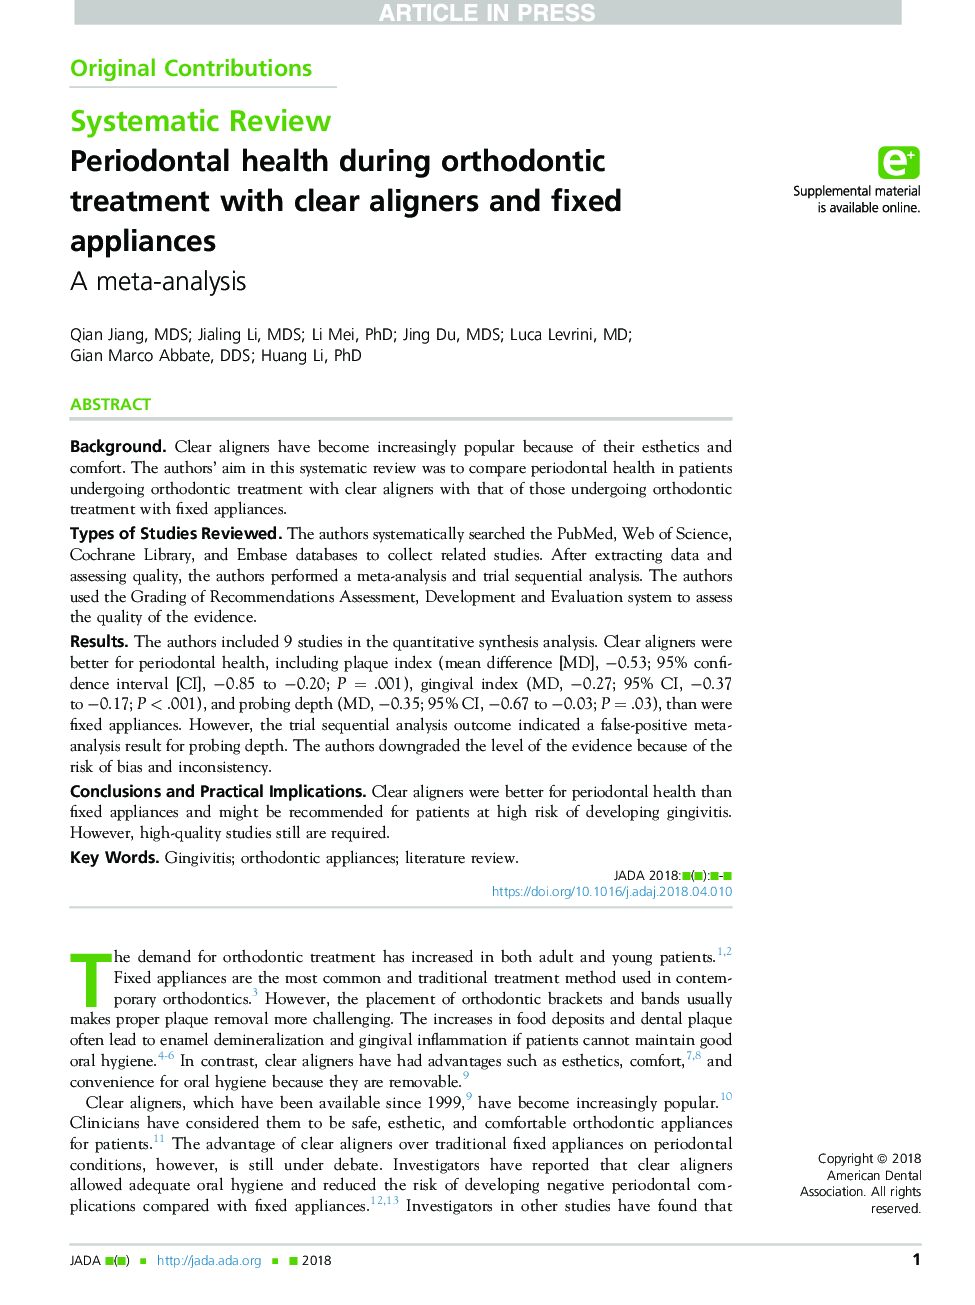 Periodontal health during orthodontic treatment with clear aligners and fixed appliances